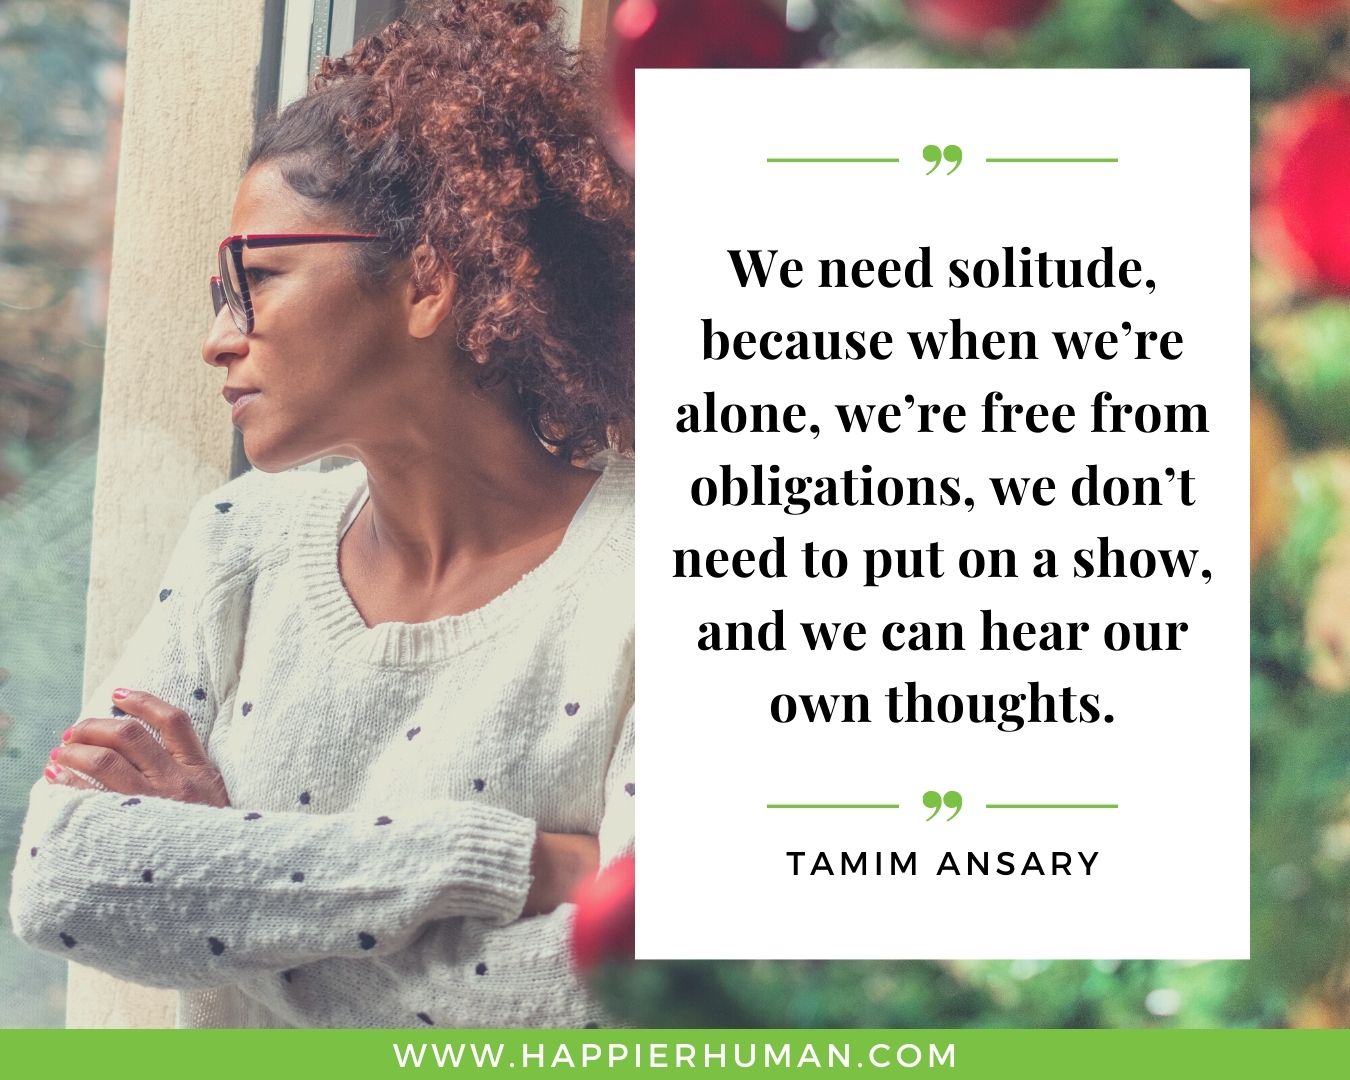 Loneliness Quotes - “We need solitude, because when we’re alone, we’re free from obligations, we don’t need to put on a show, and we can hear our own thoughts.” – Tamim Ansary